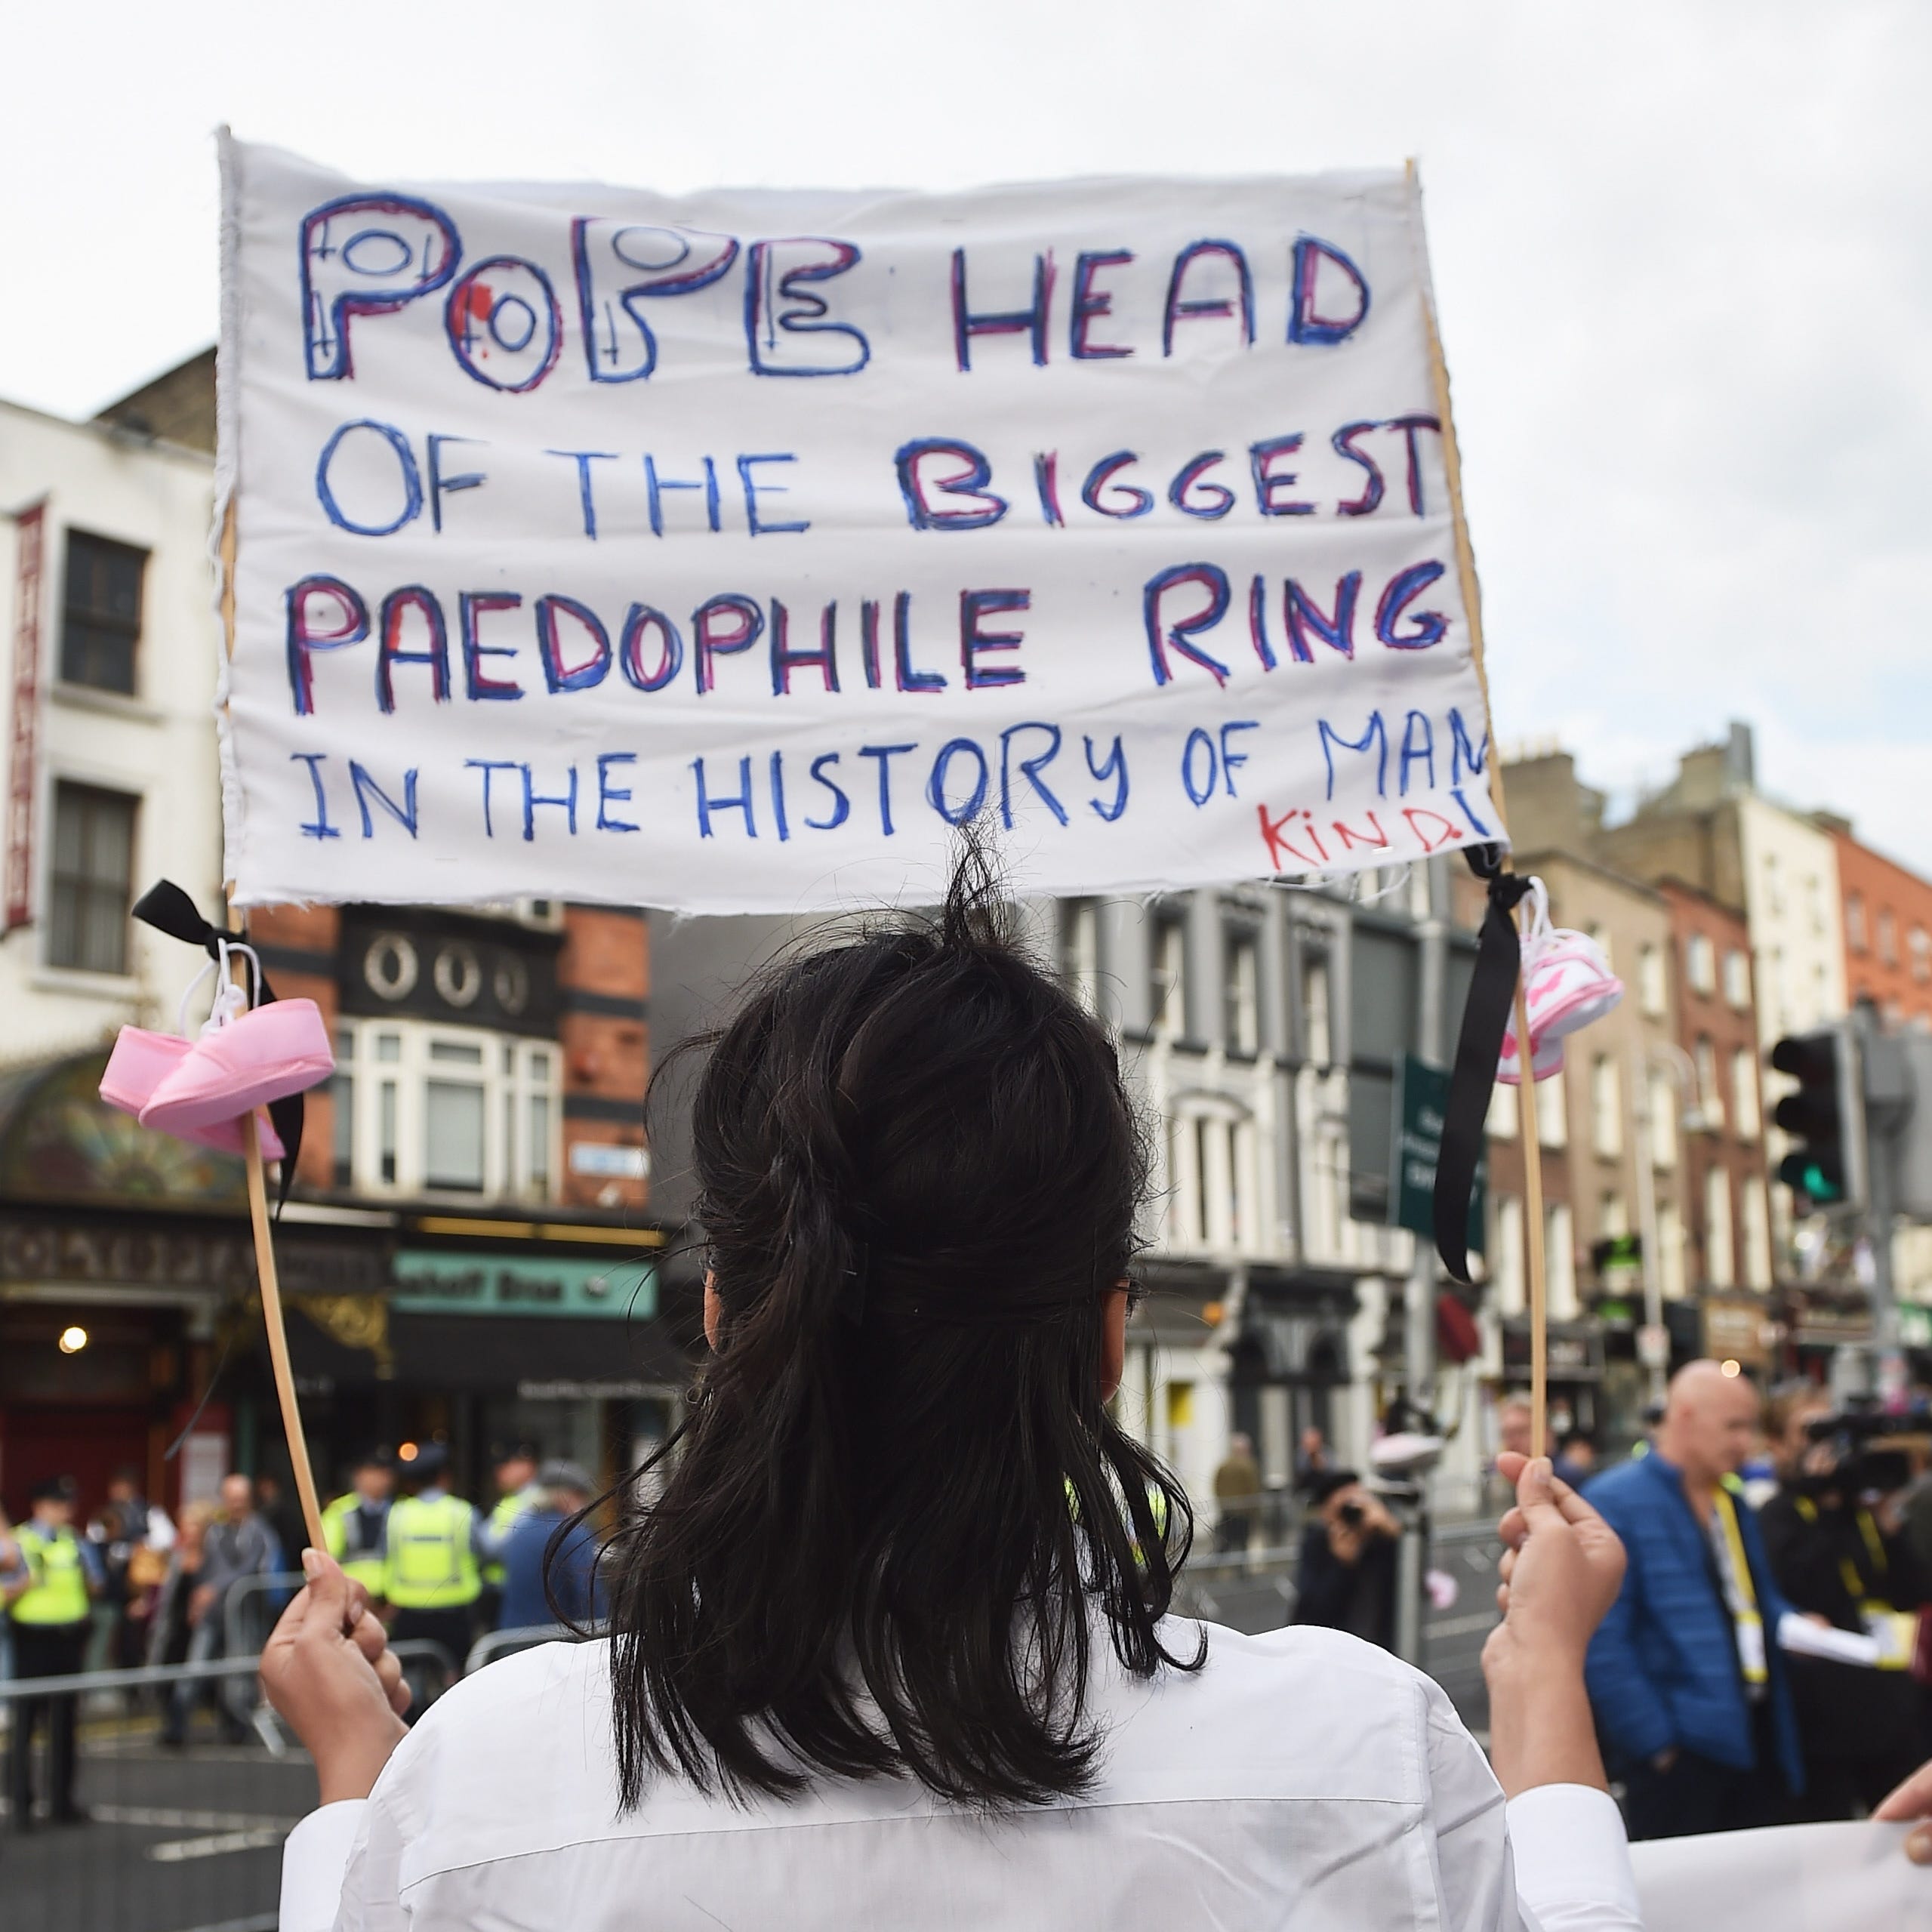 A protester holds up a sign in reference to the sex abuse scandal within the Catholic Church as Pope Francis travels through the city in the Popemobile on Aug. 25, 2018 in Dublin, Ireland.